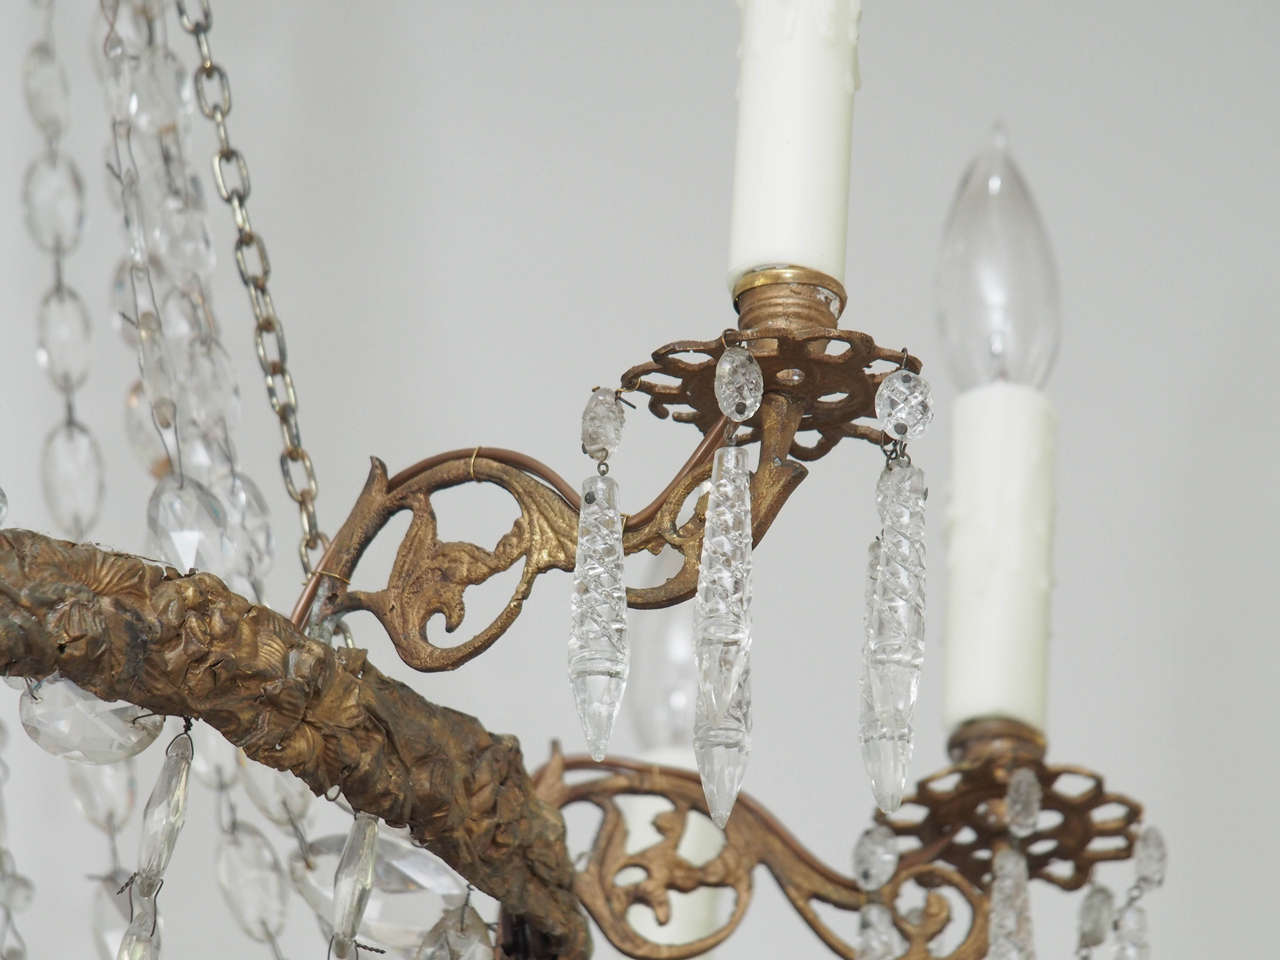 19th Century Empire Chandelier For Sale 2